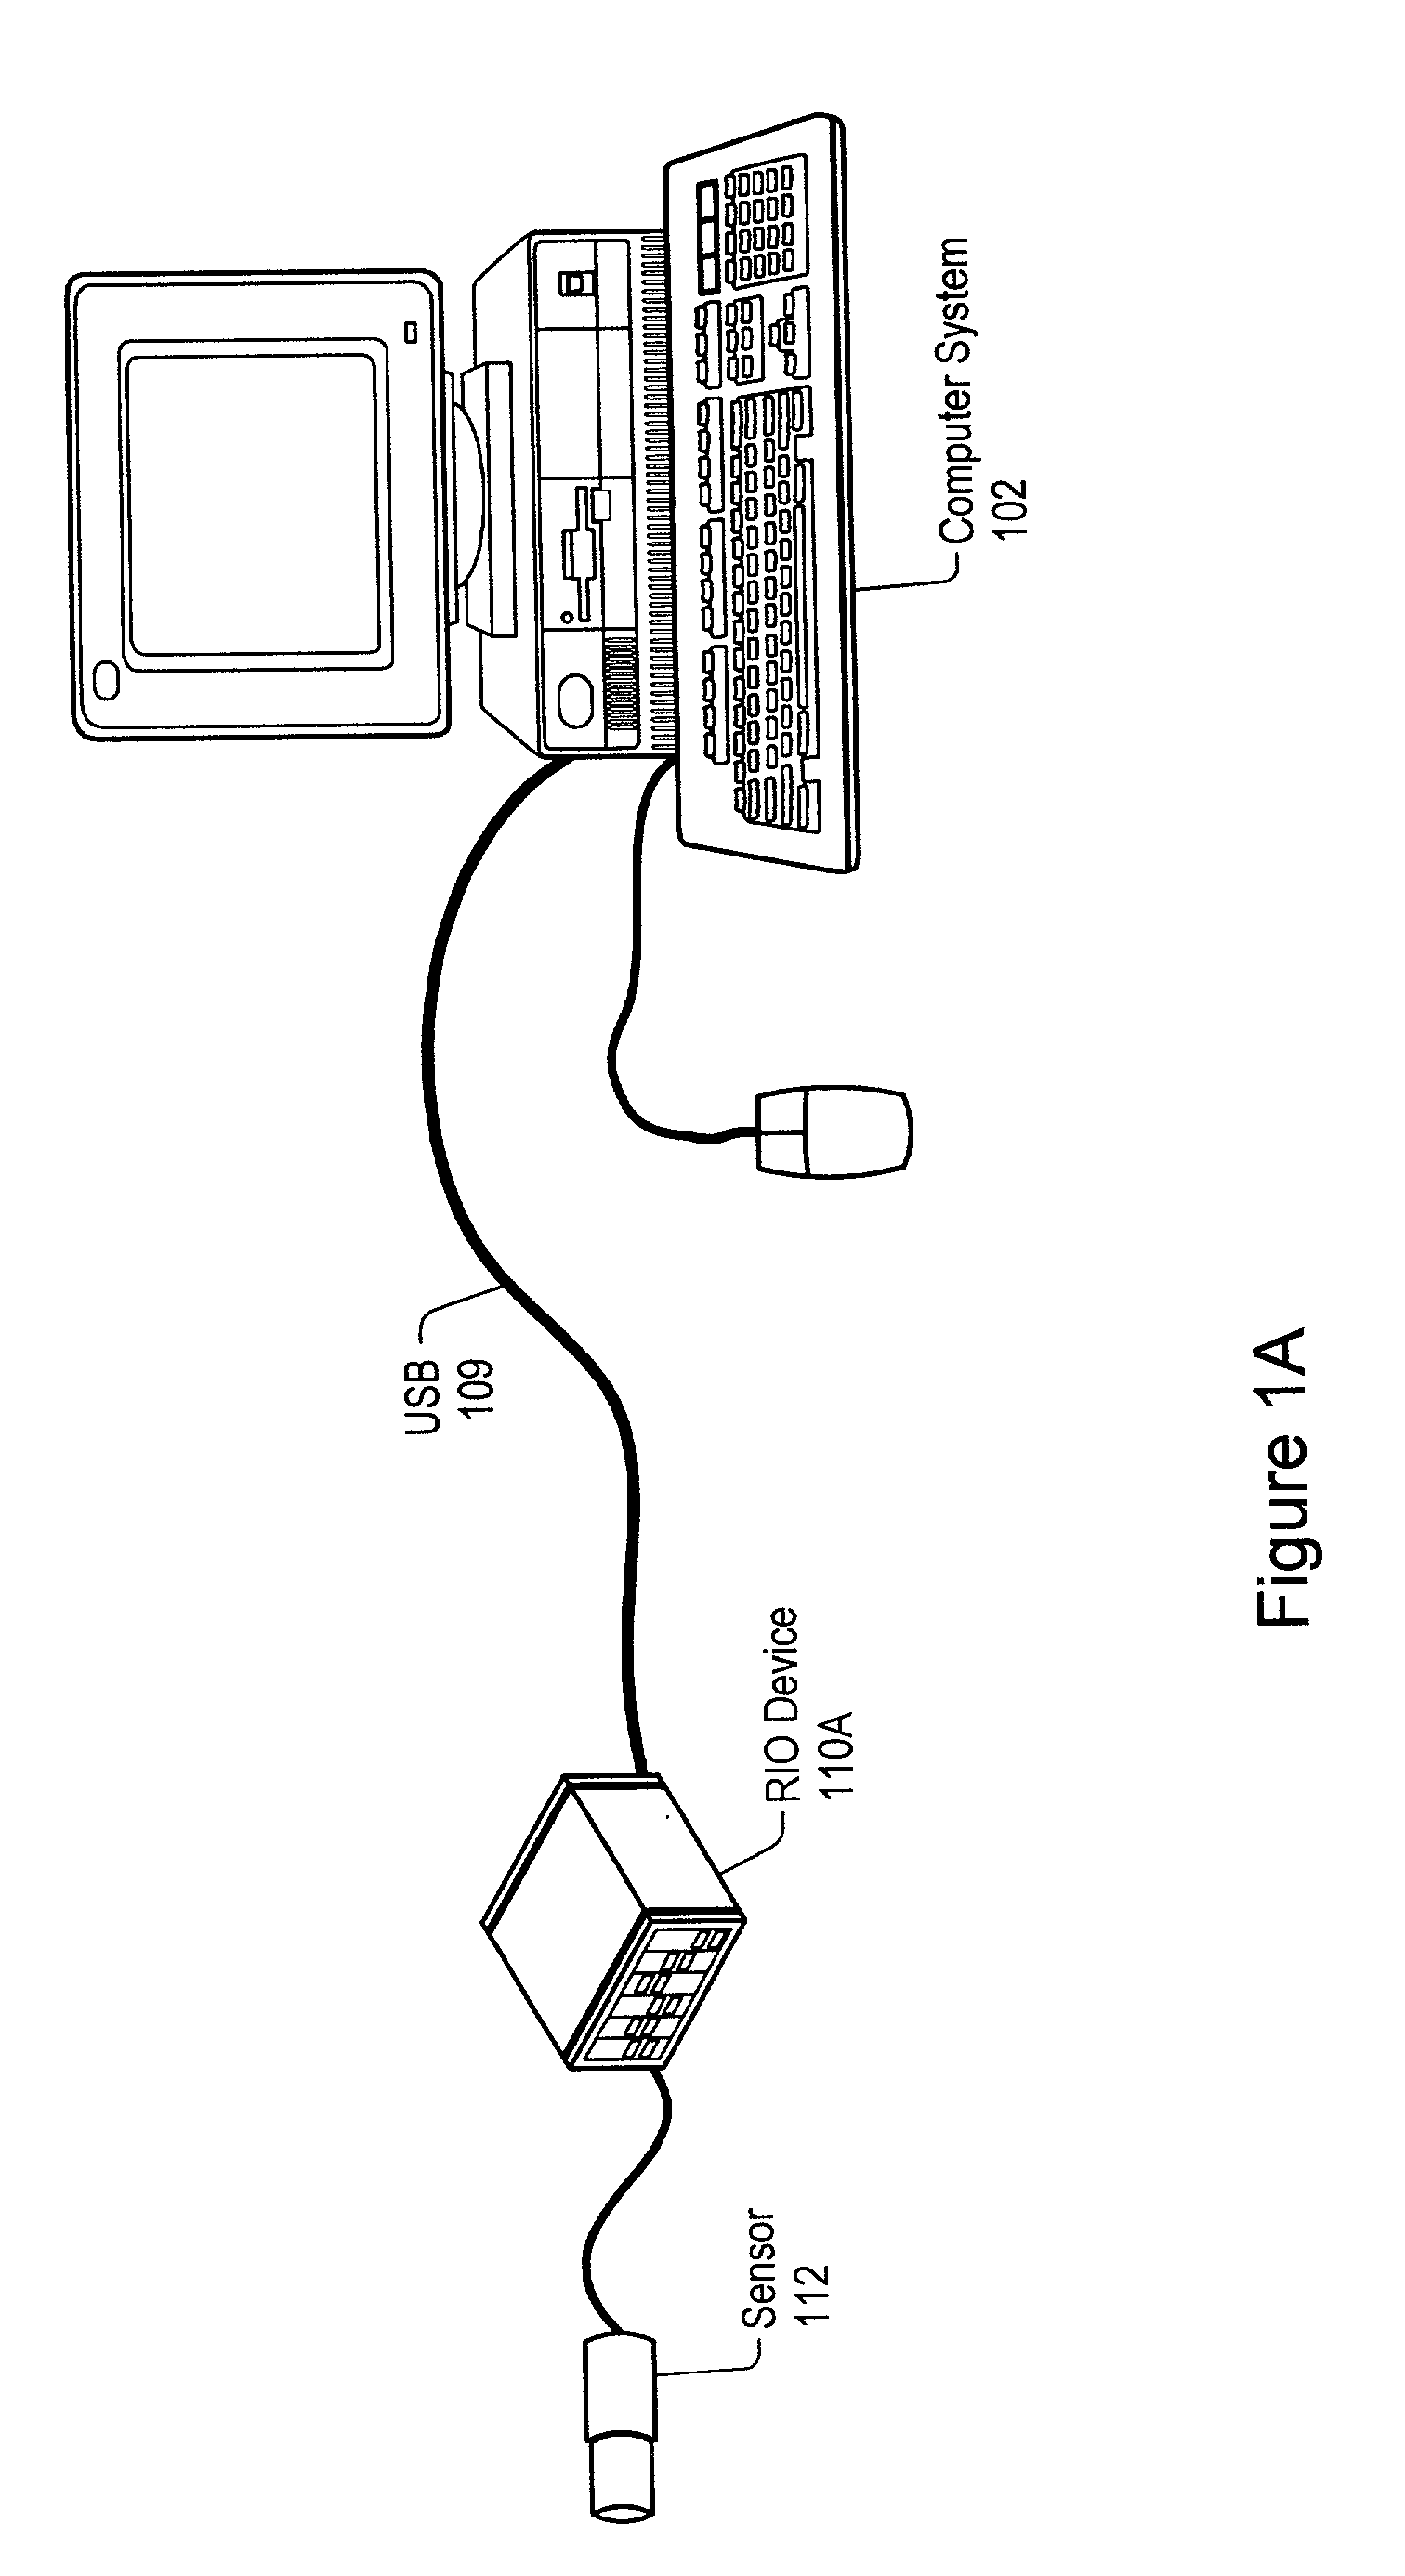 Reconfigurable measurement system utilizing a programmable hardware element and fixed hardware resources